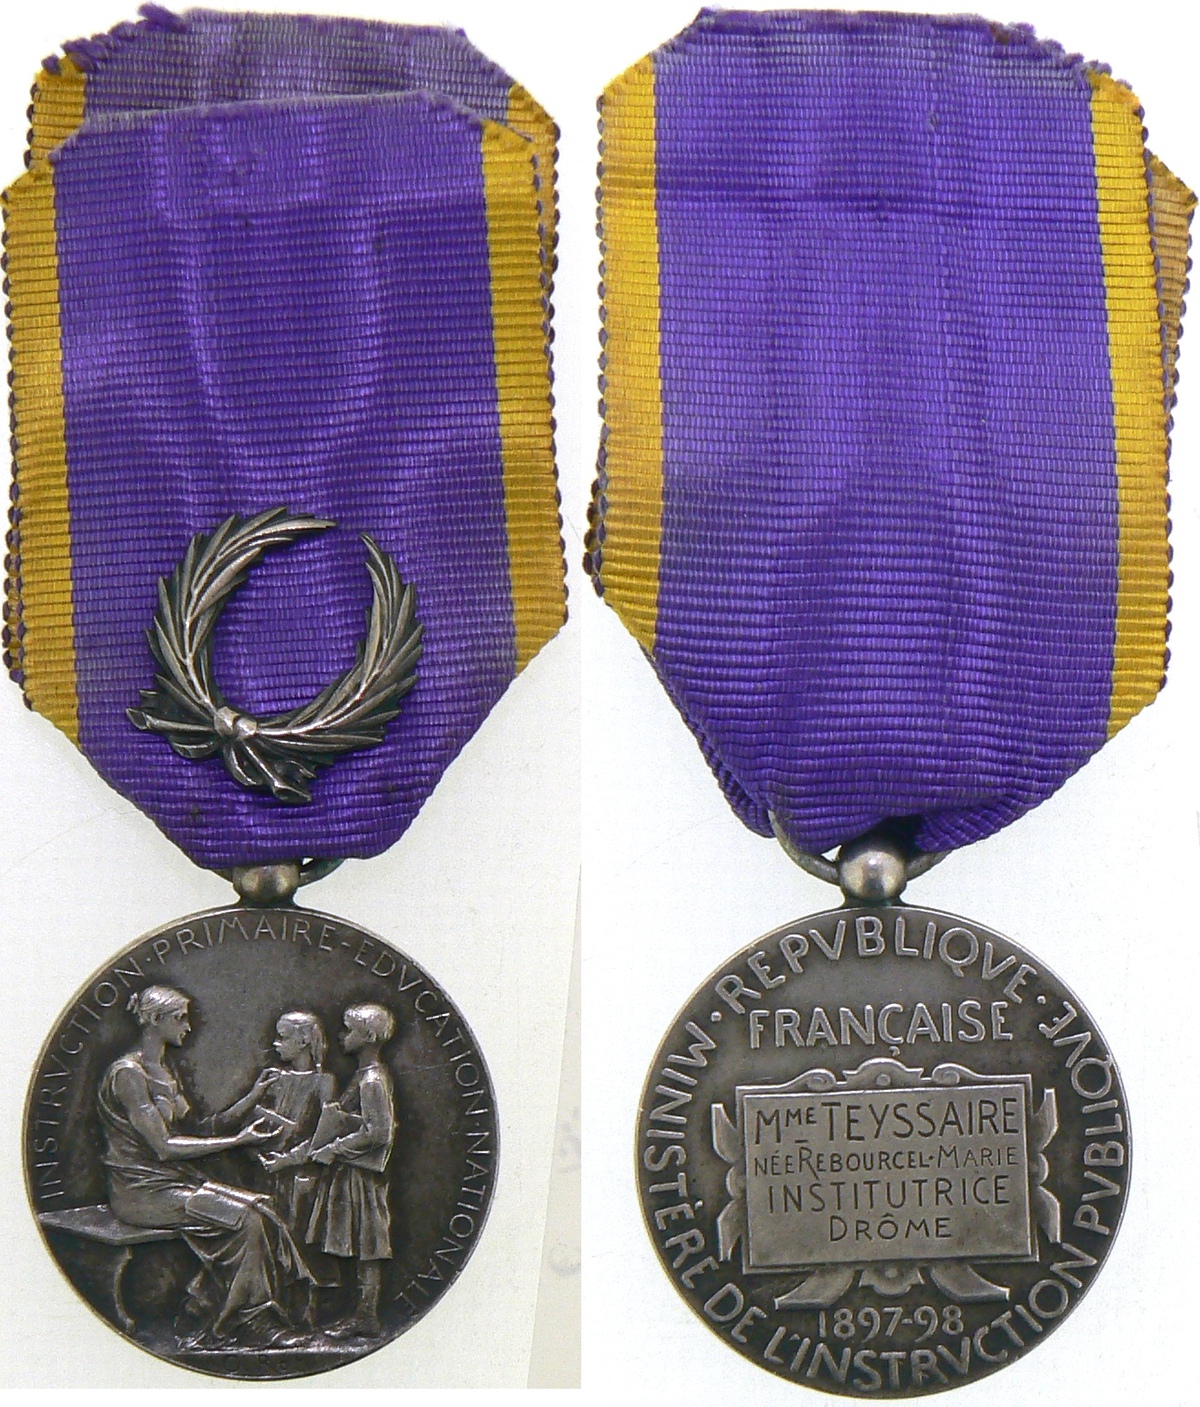 Primary Instruction and National Education Medal, 1st Type